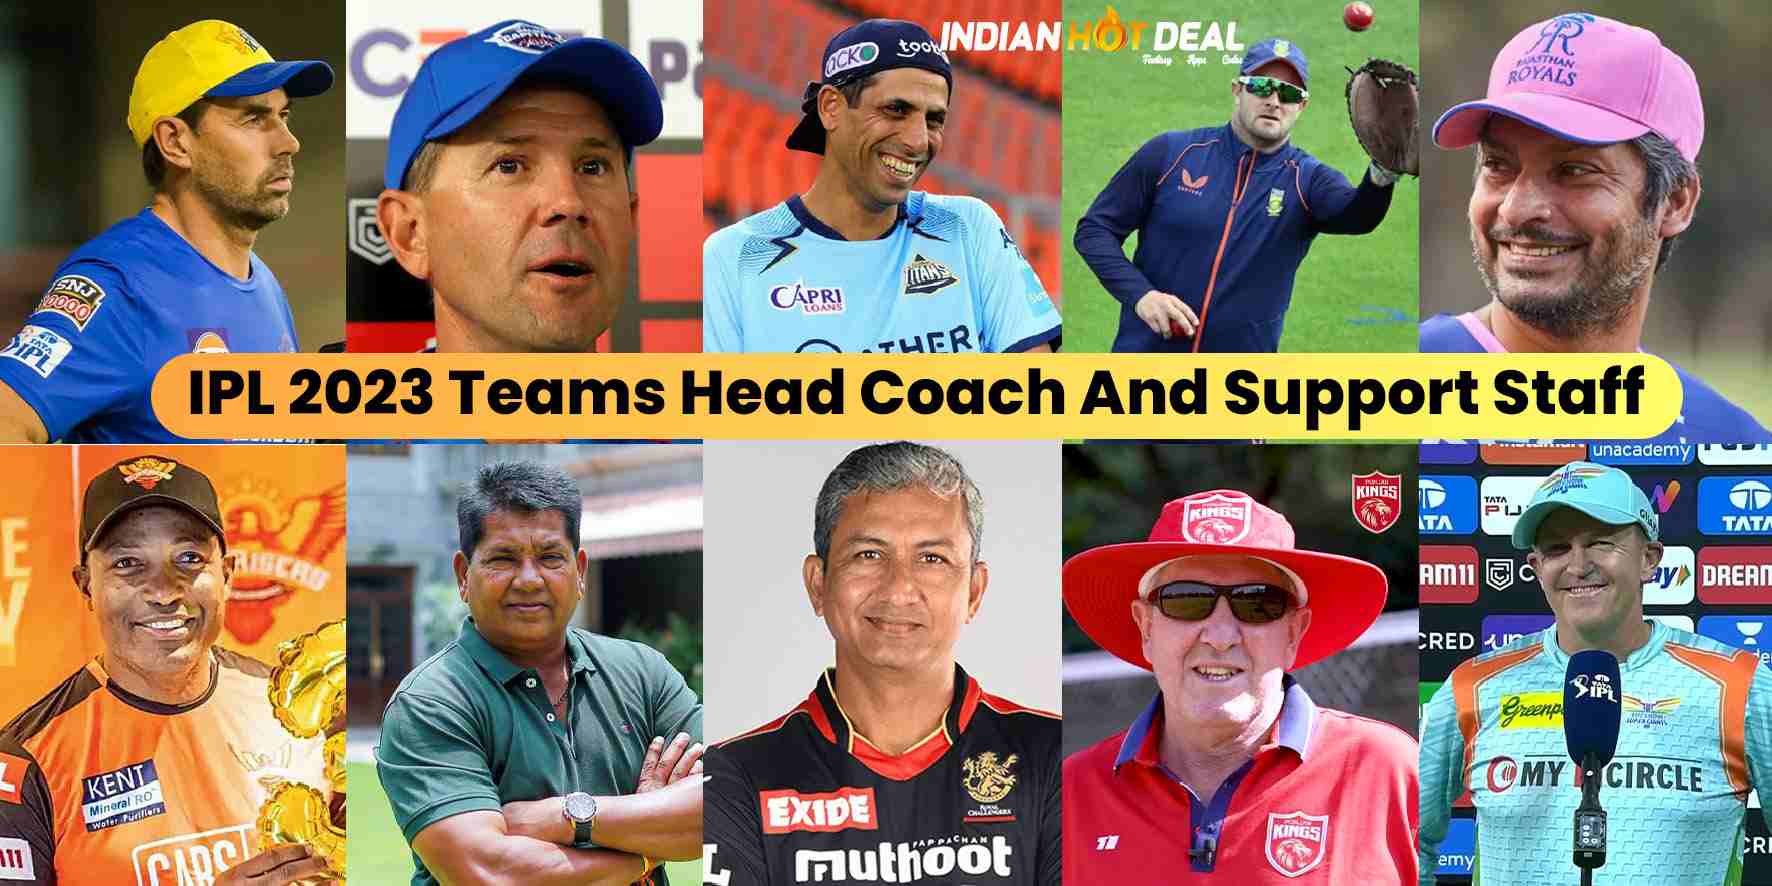 IPL 2023 Teams Head Coach And Support Staff For All 10 Teams